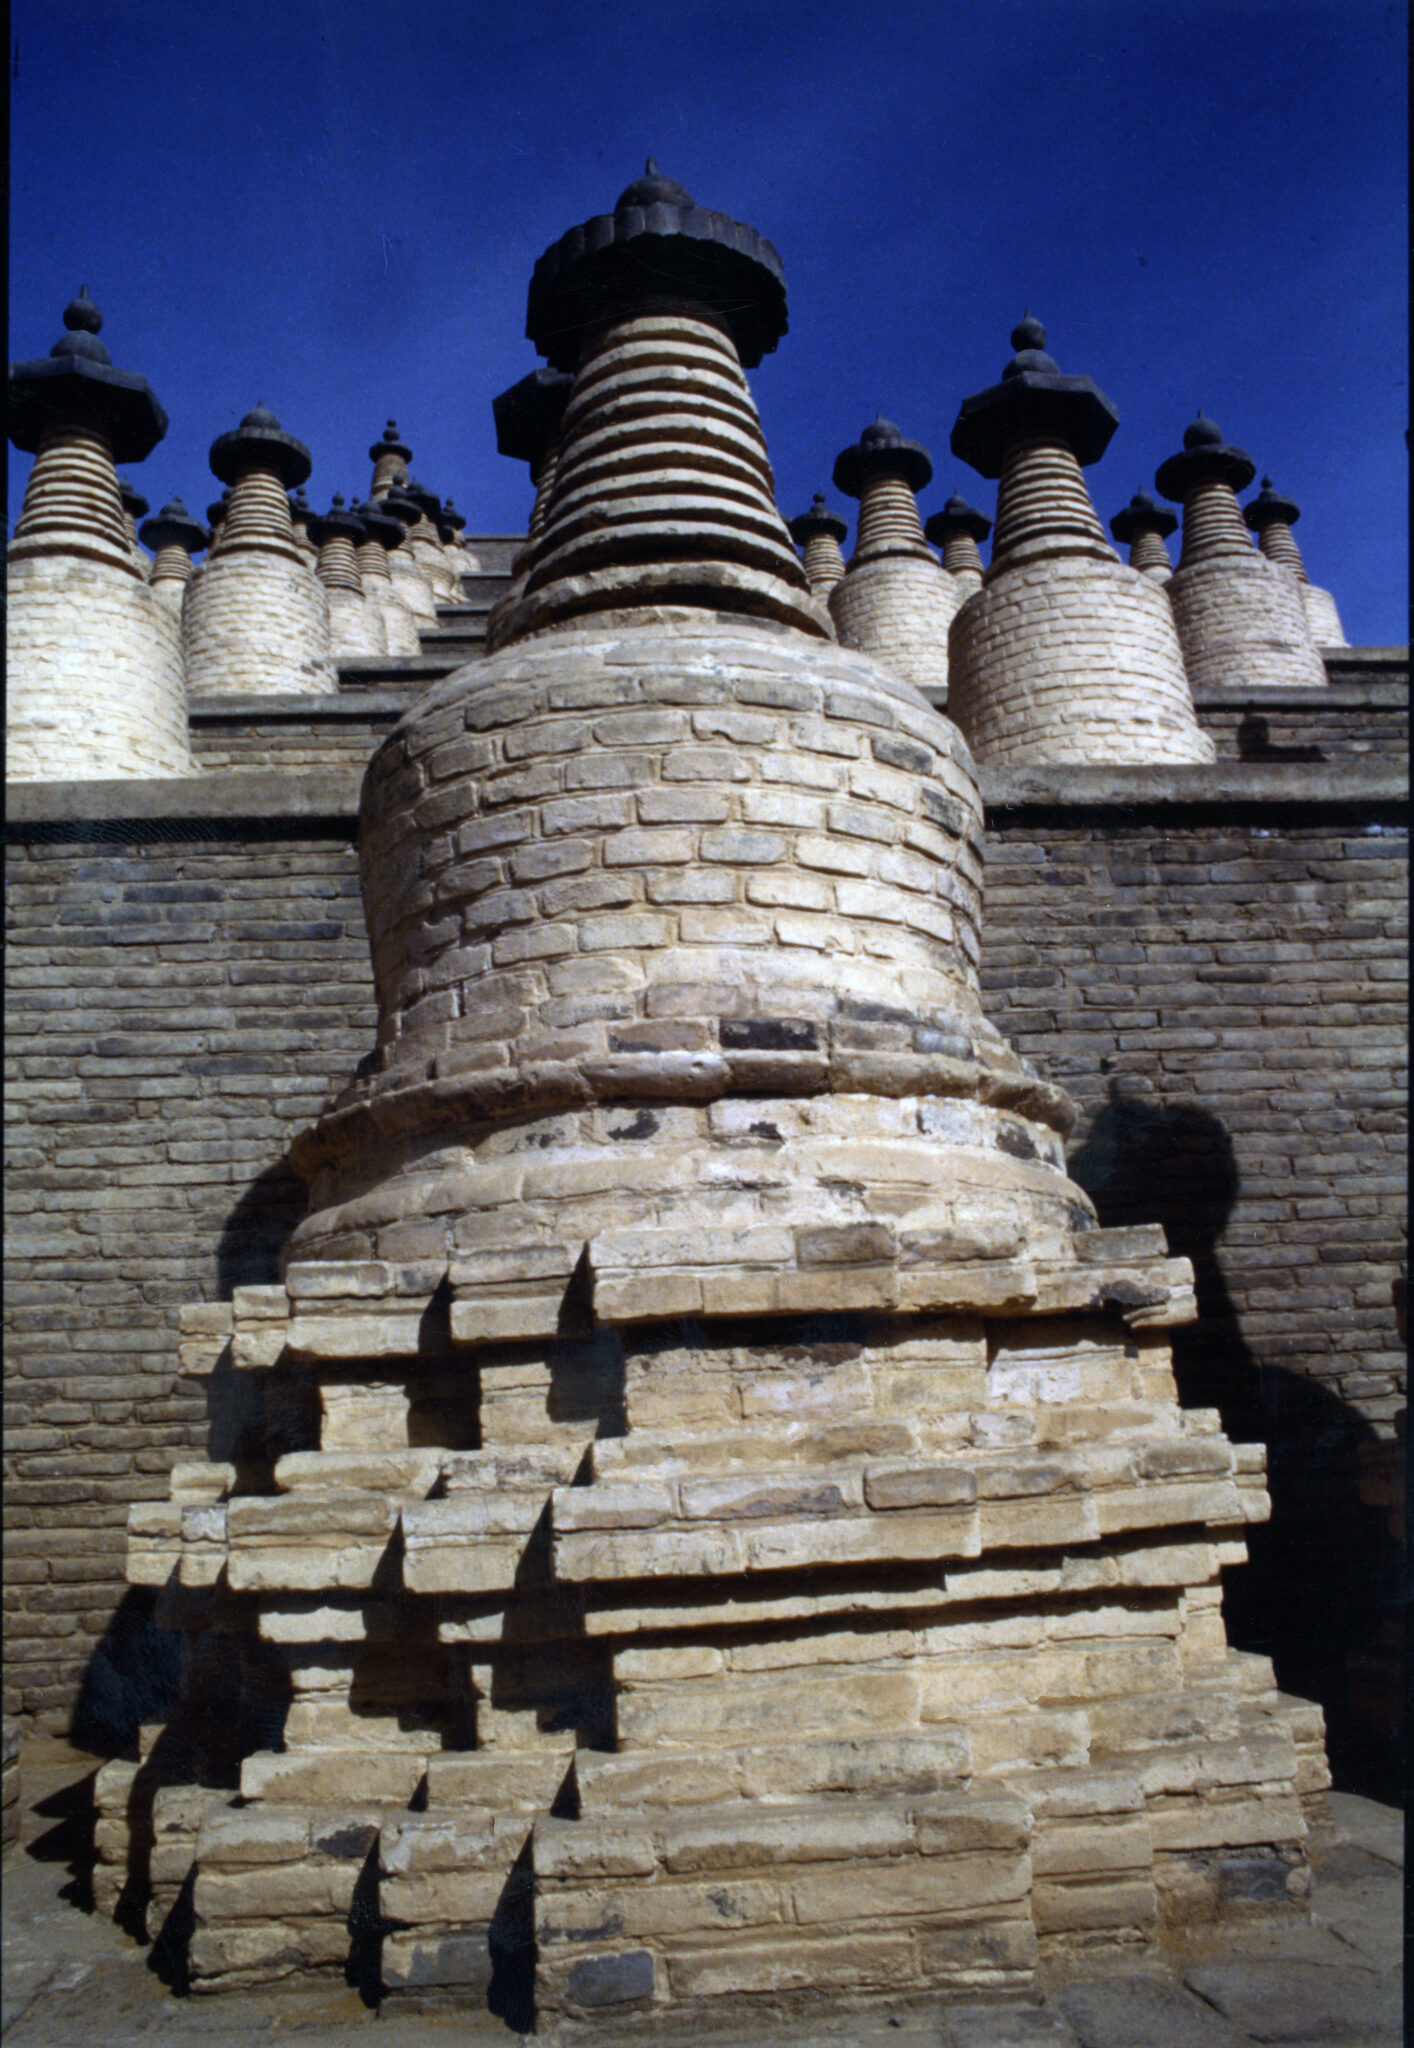 View from bottom of stupas positioned in long, ascending rows on tiers of gray brick structure